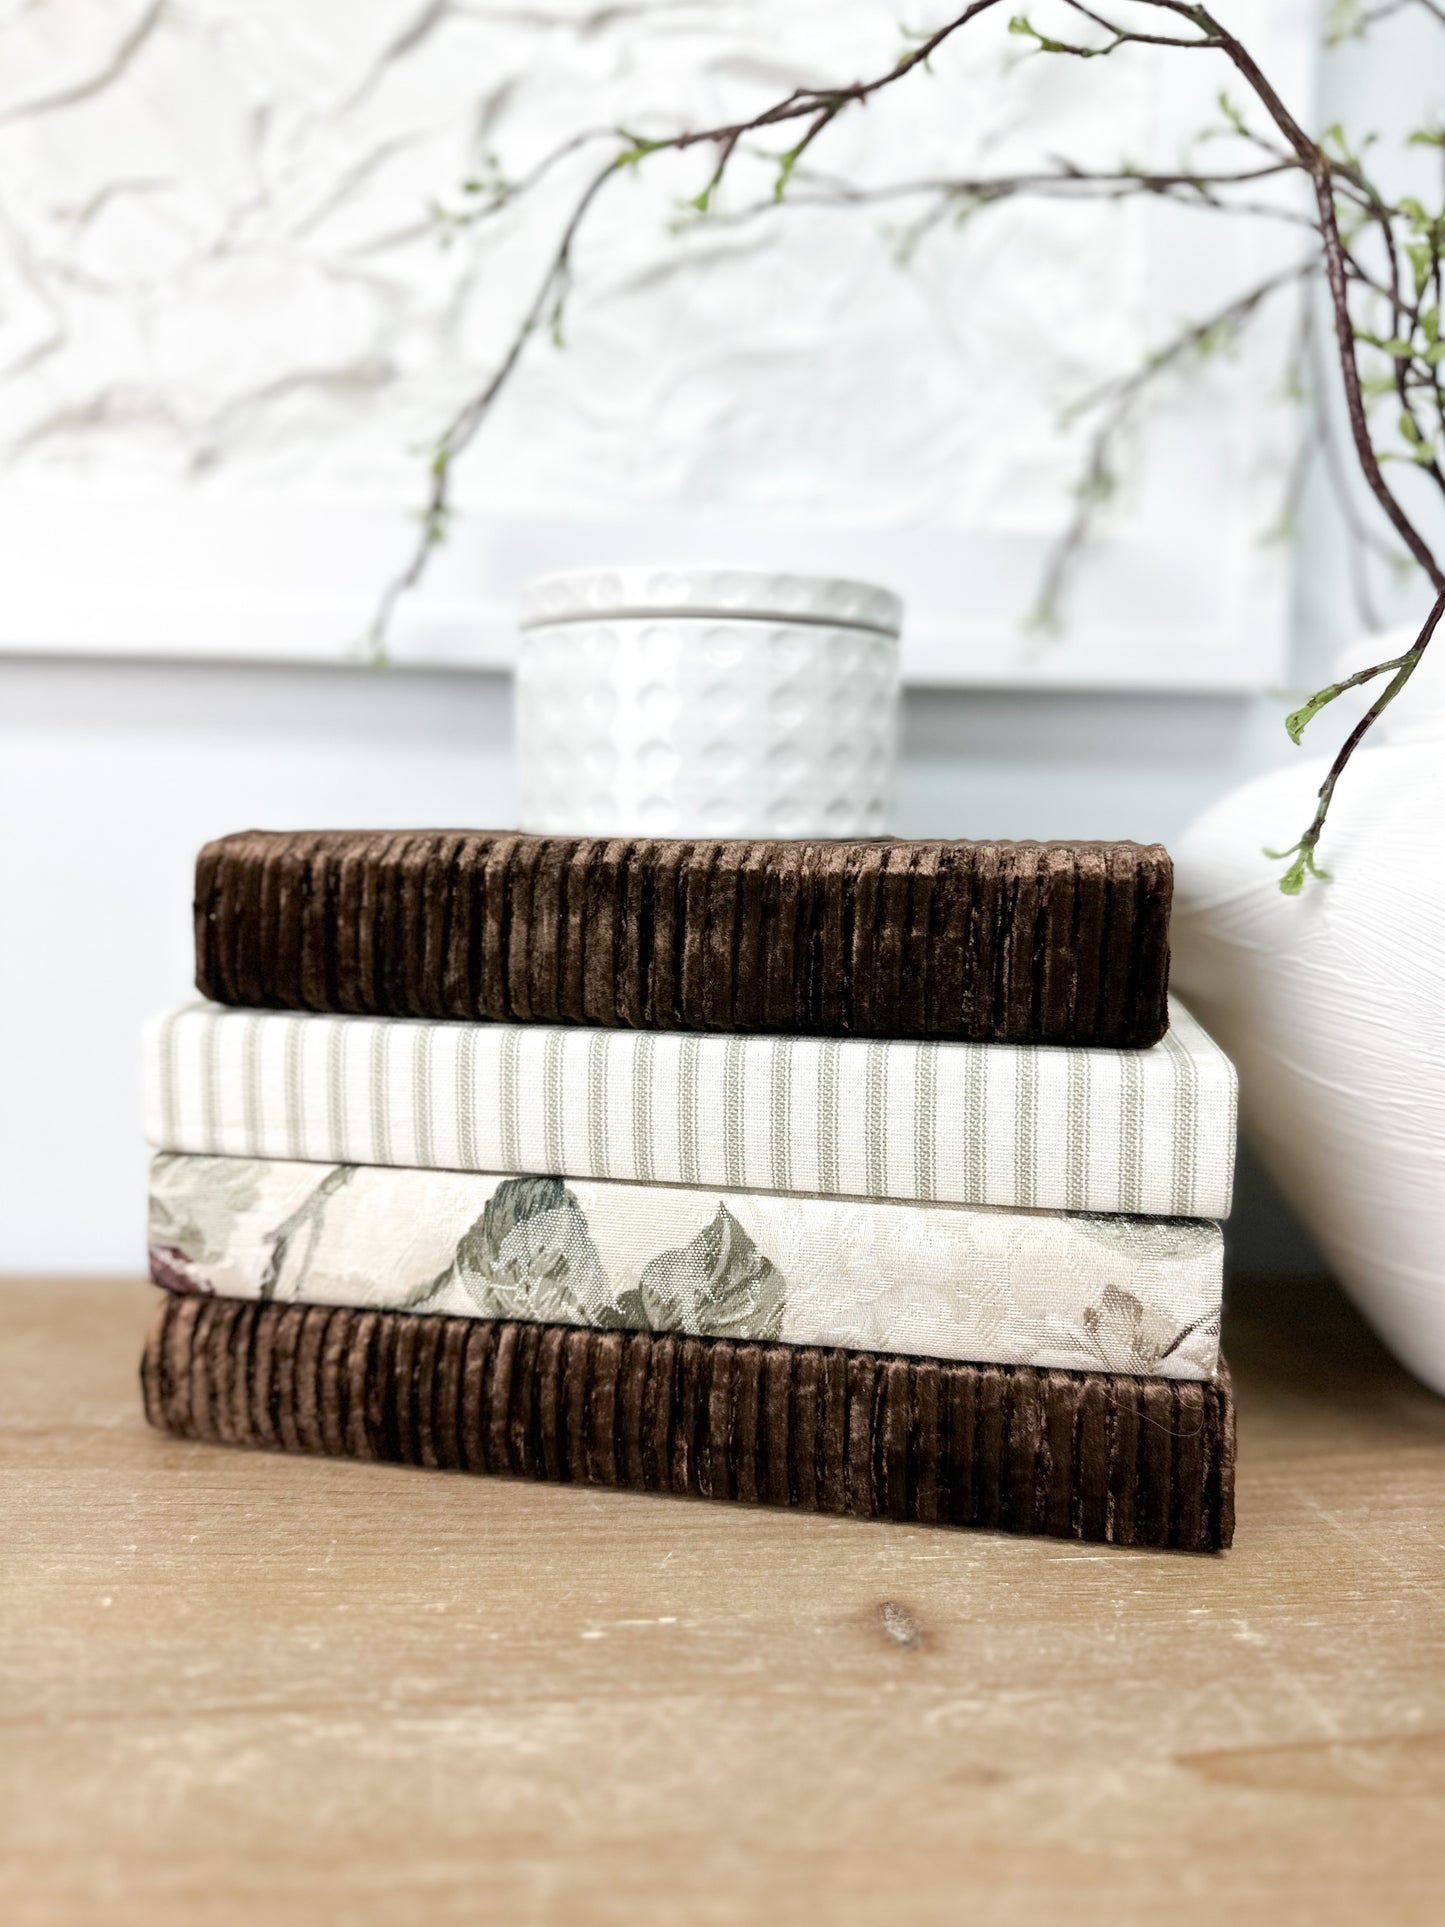 Brown Linen Covered Books